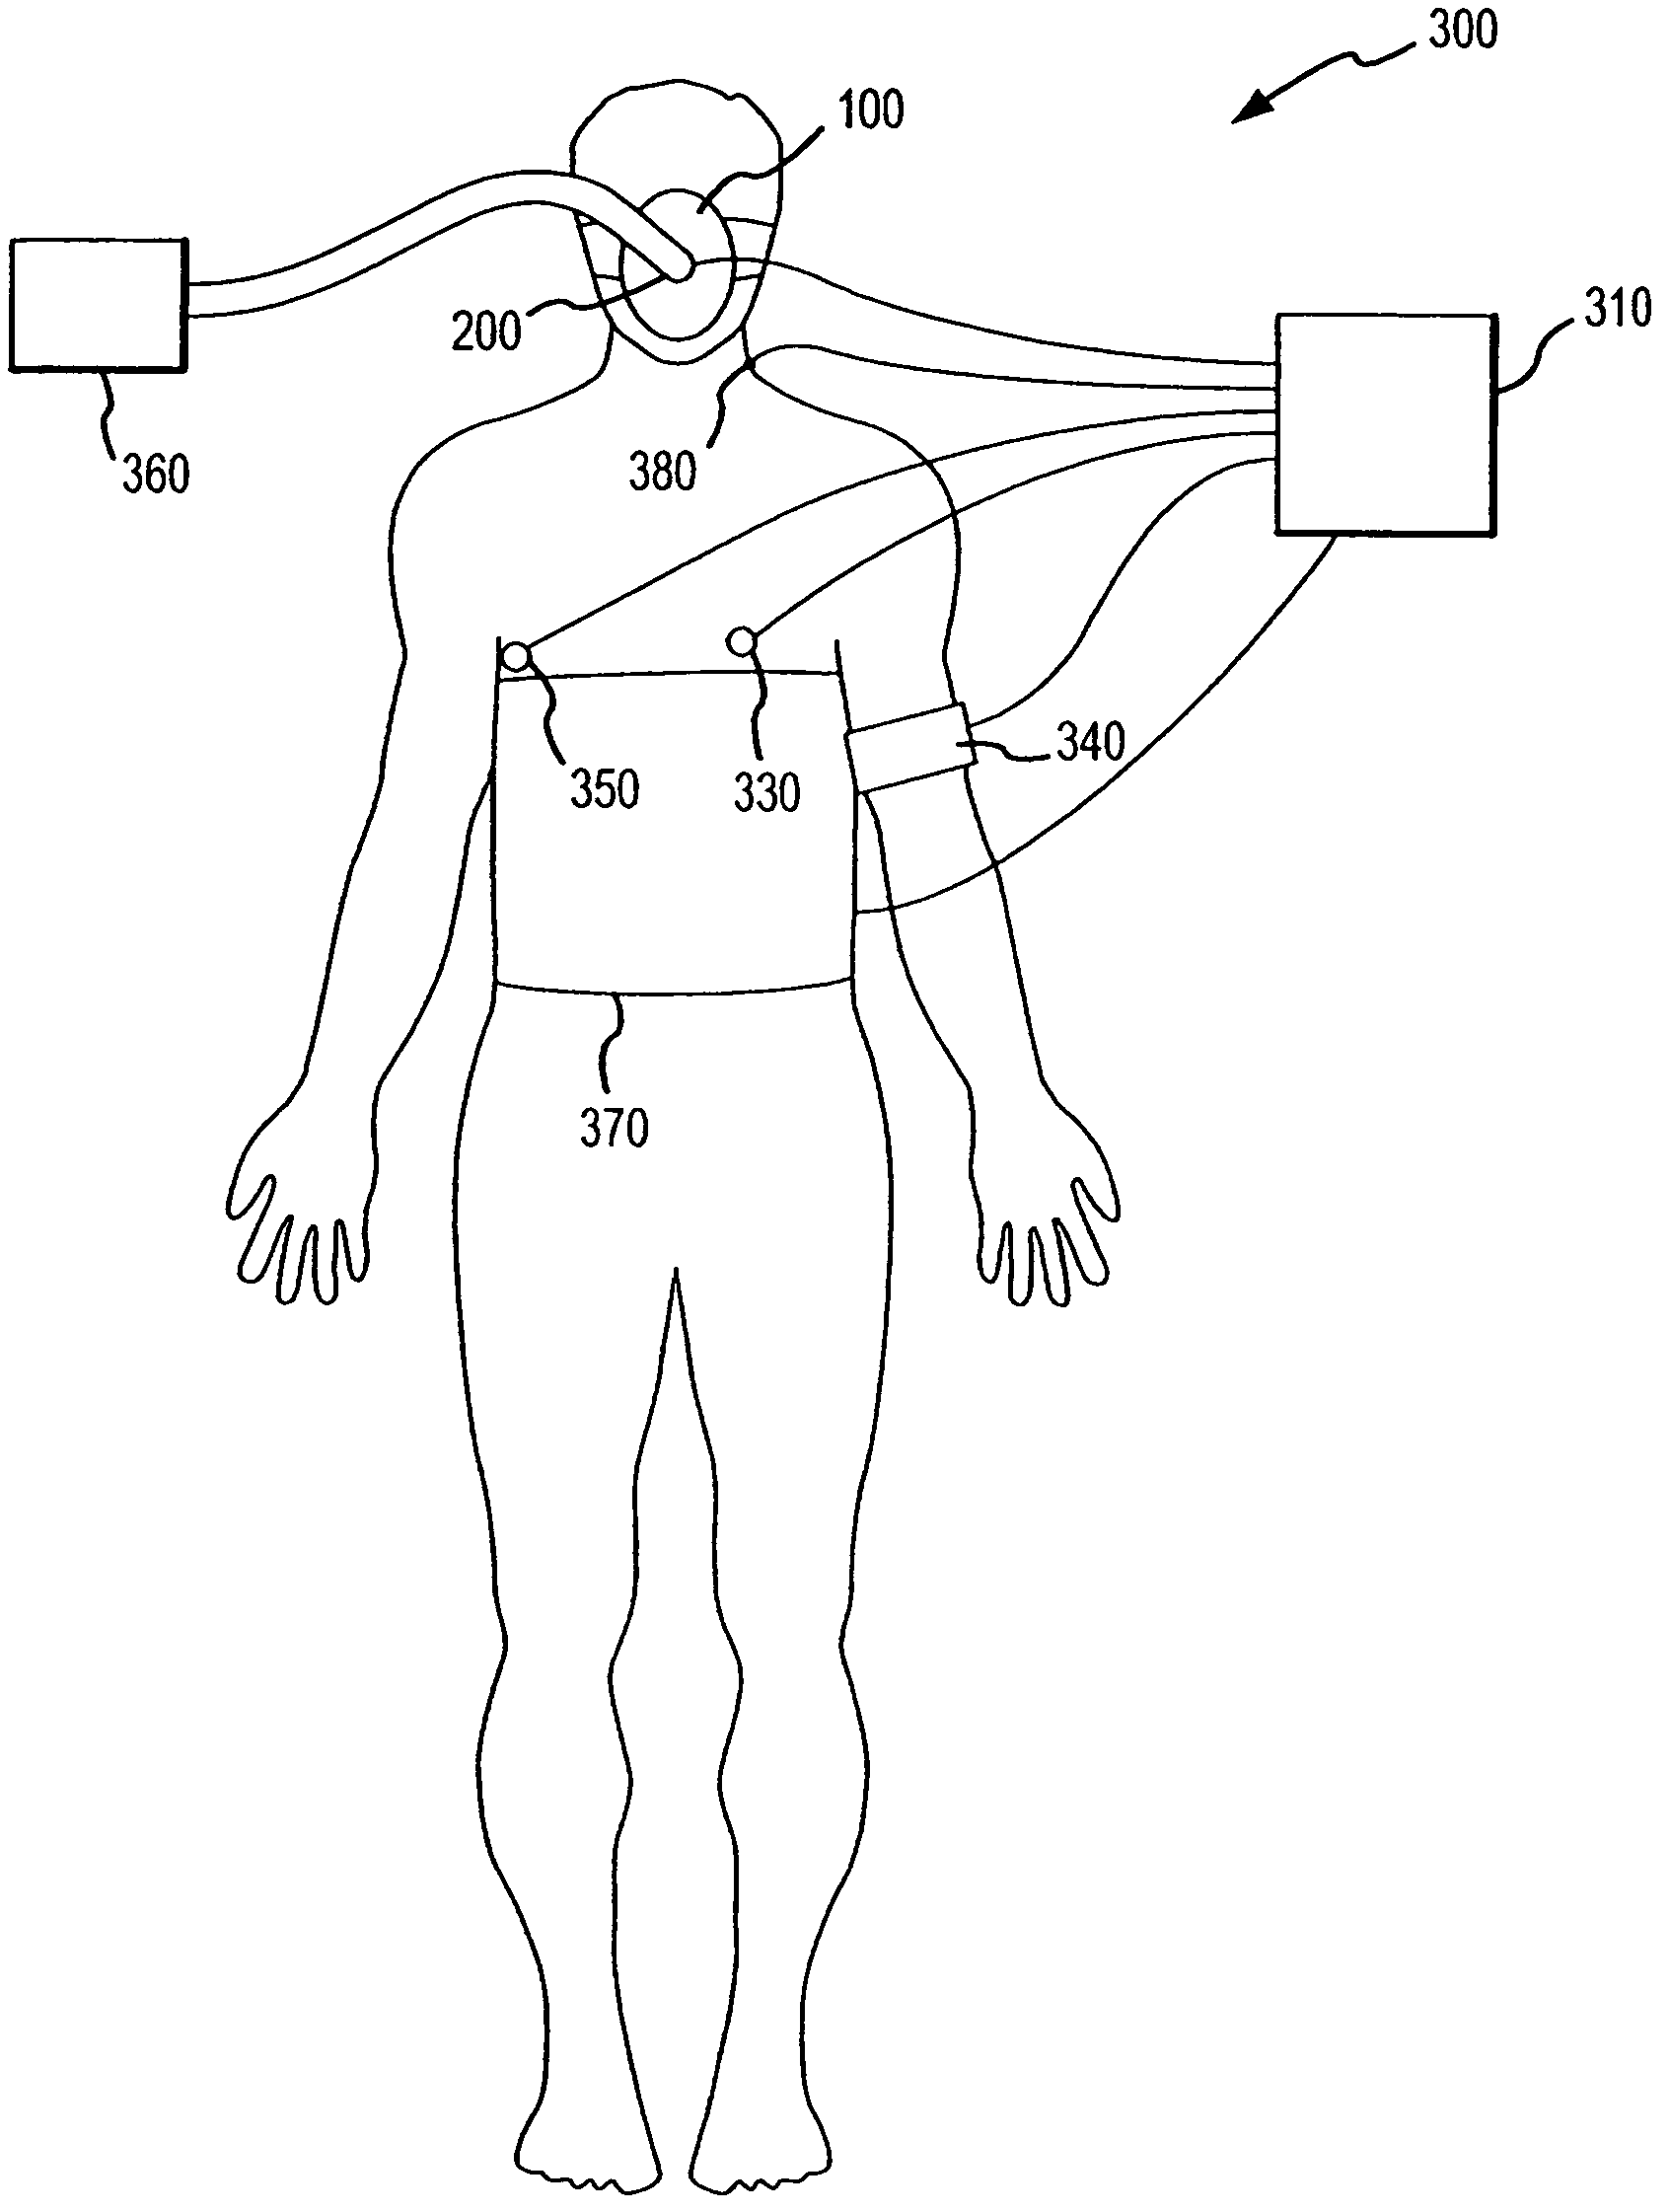 Ventilator and methods for treating head trauma and low blood circulation